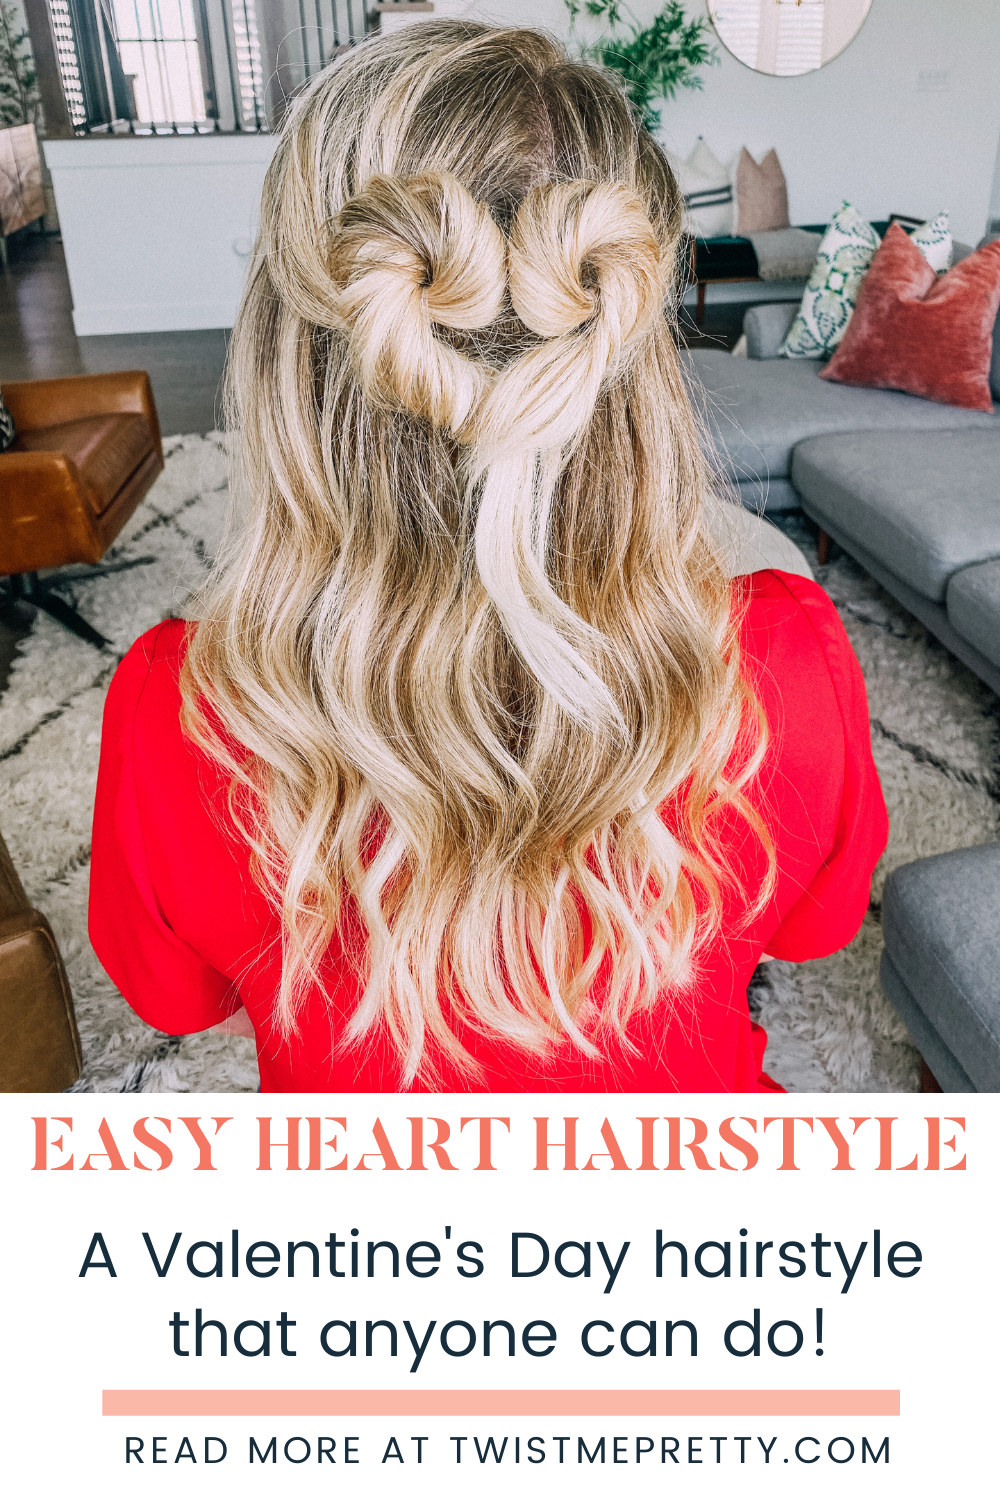 Triple Tuck Heart Hairstyle For Valentines Day  Hairstyles For Girls   Princess Hairstyles